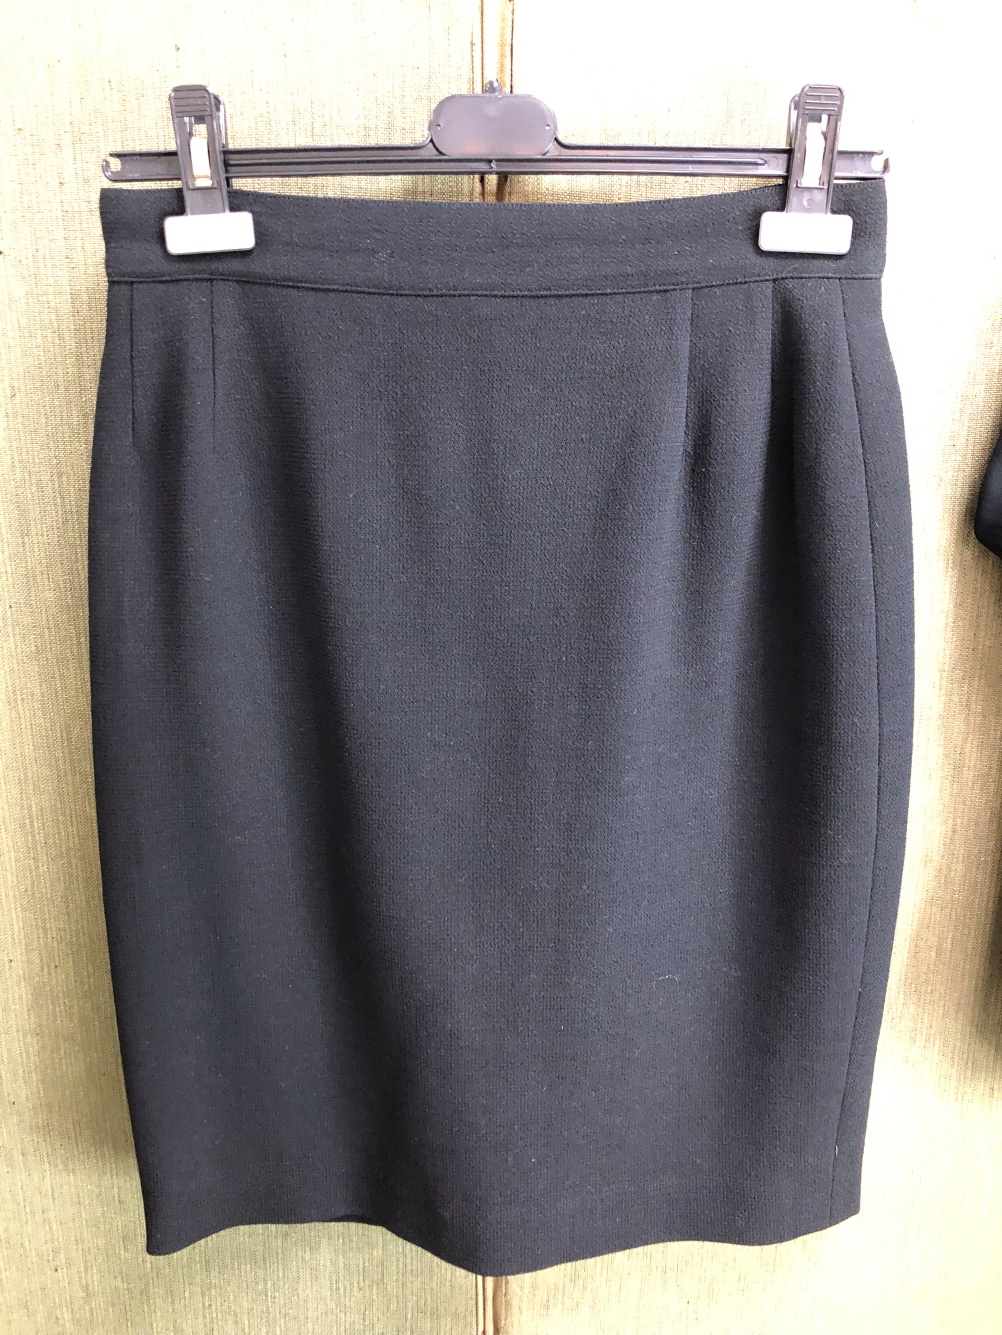 A GENNY BLACK WOOL SKIRT GB 34, A PAIR OF BLACK JOSEPH TROUSERS SIZE 42, A BLACK RENA LANGE T-SHIRT, - Image 11 of 16